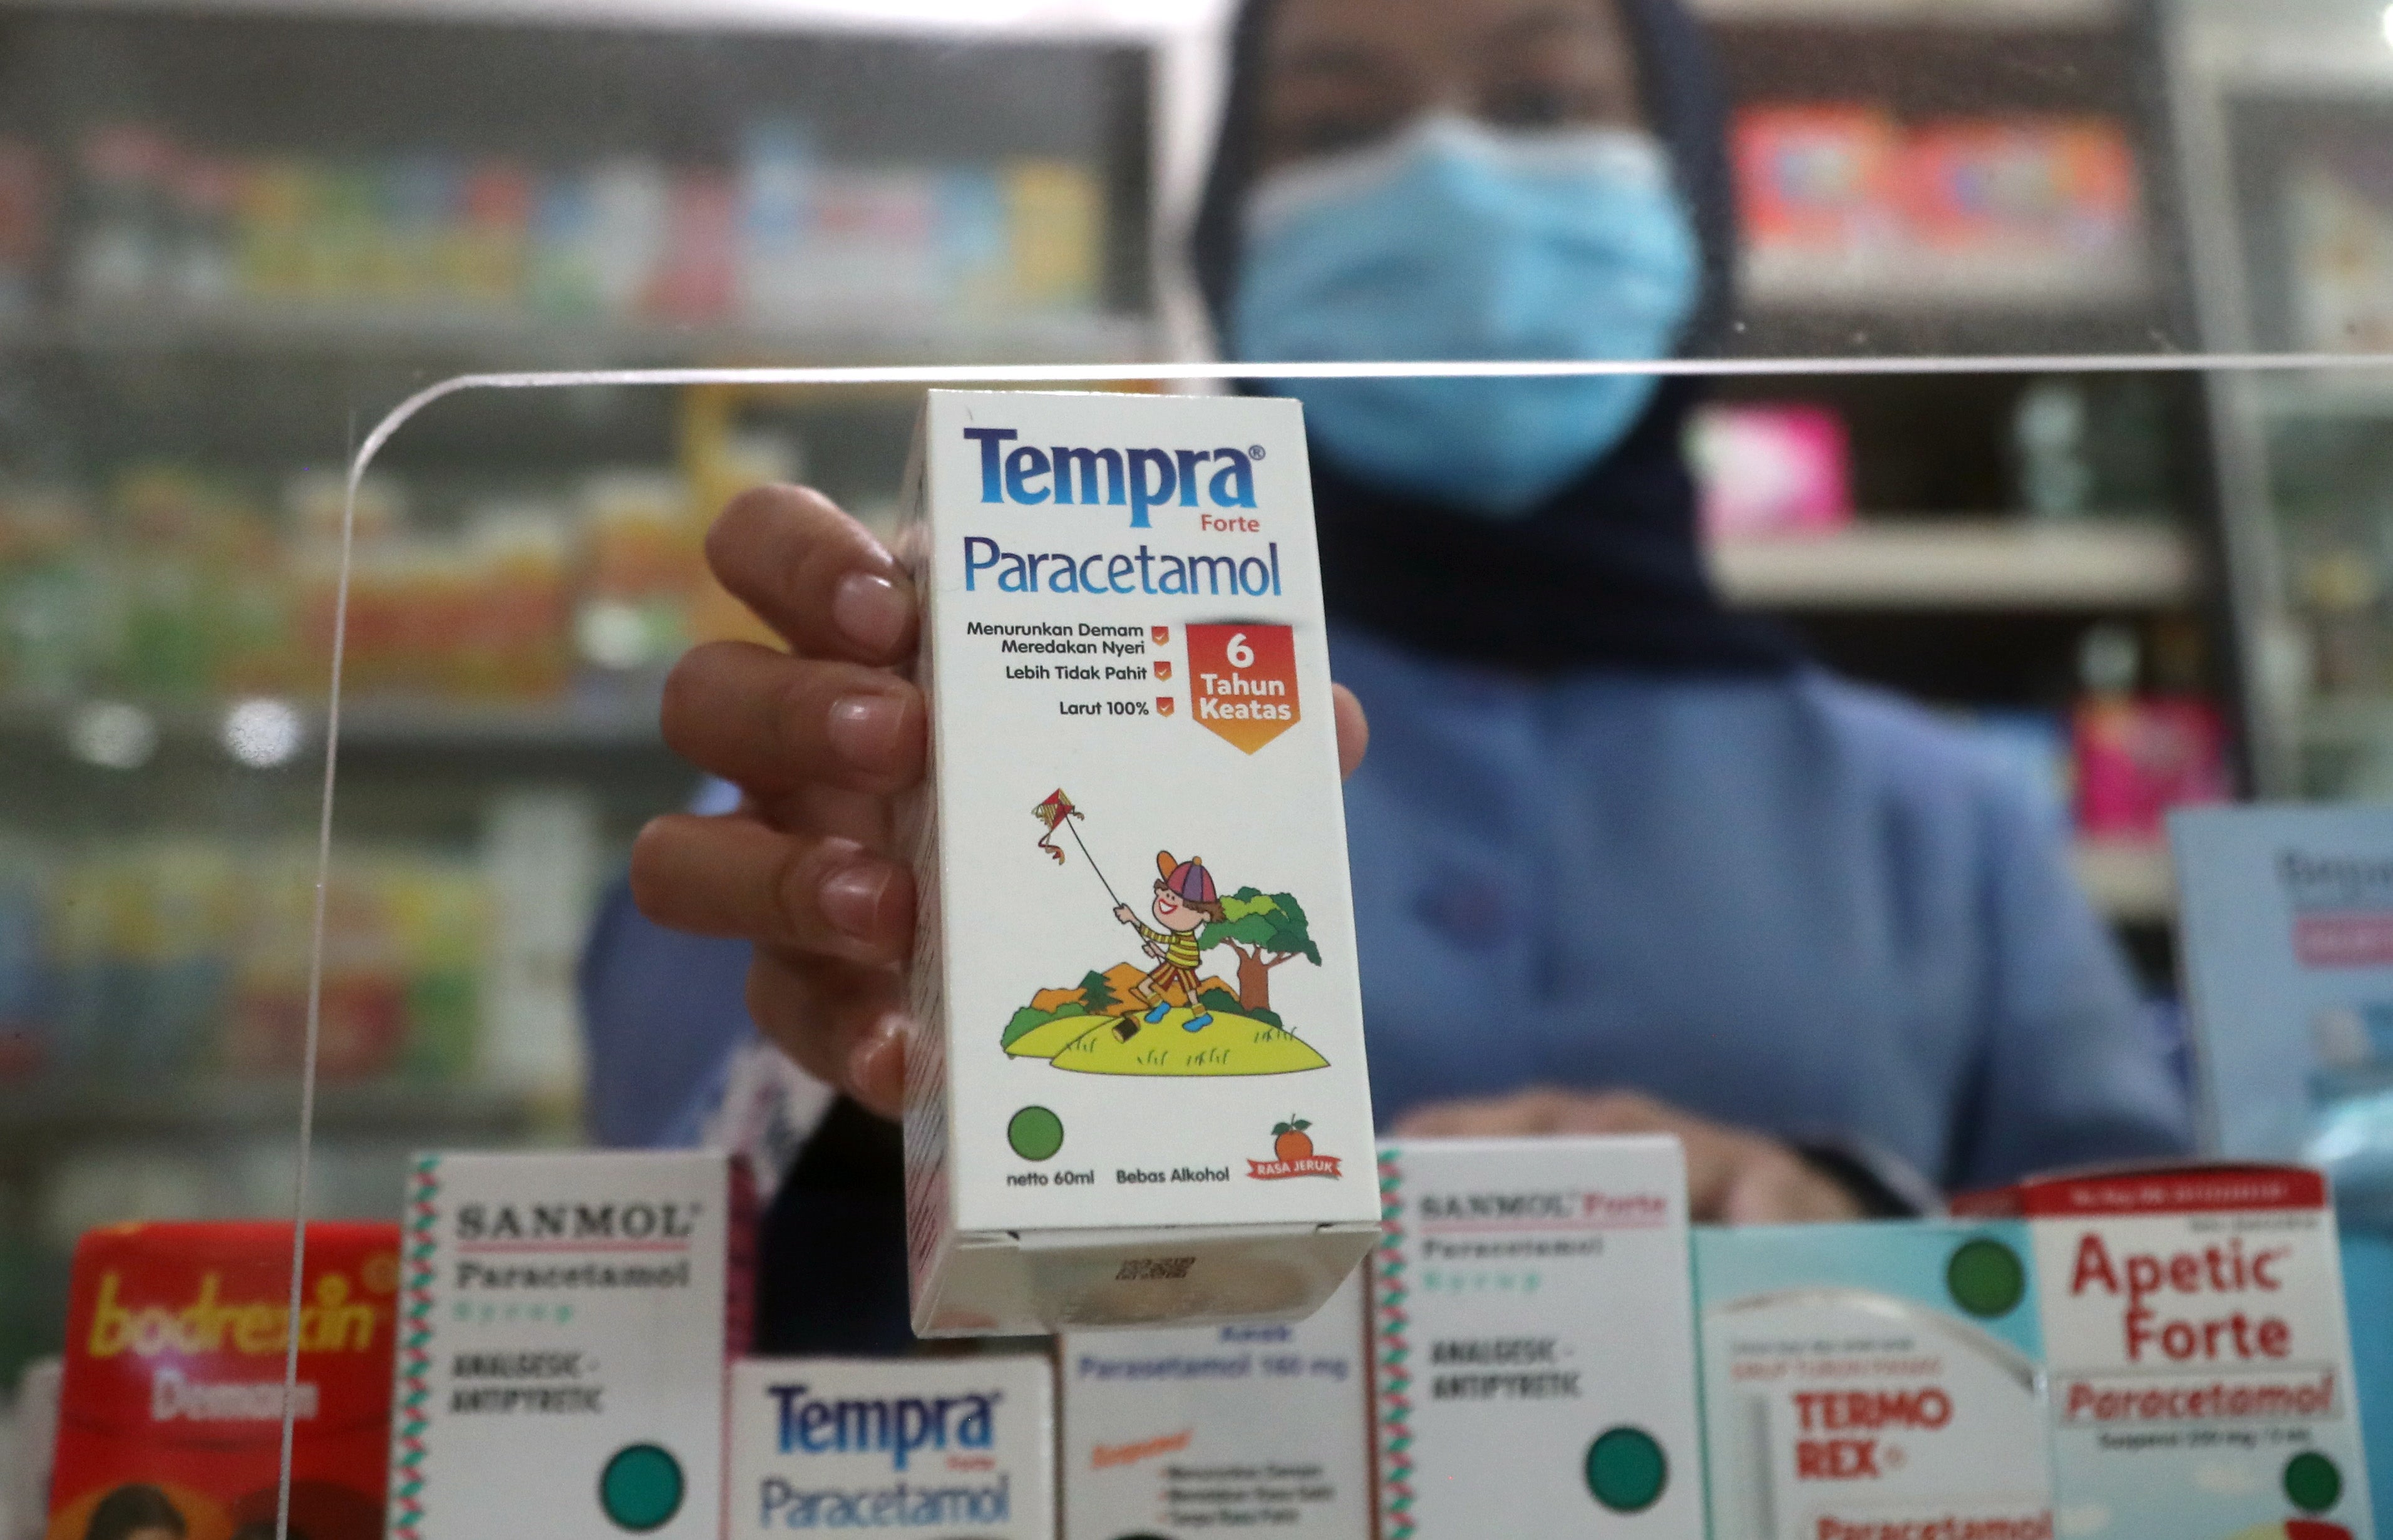 A pharmacist shows a paracetamol syrup for children as it is removed from the shelf in Depok, West Java, Indonesia